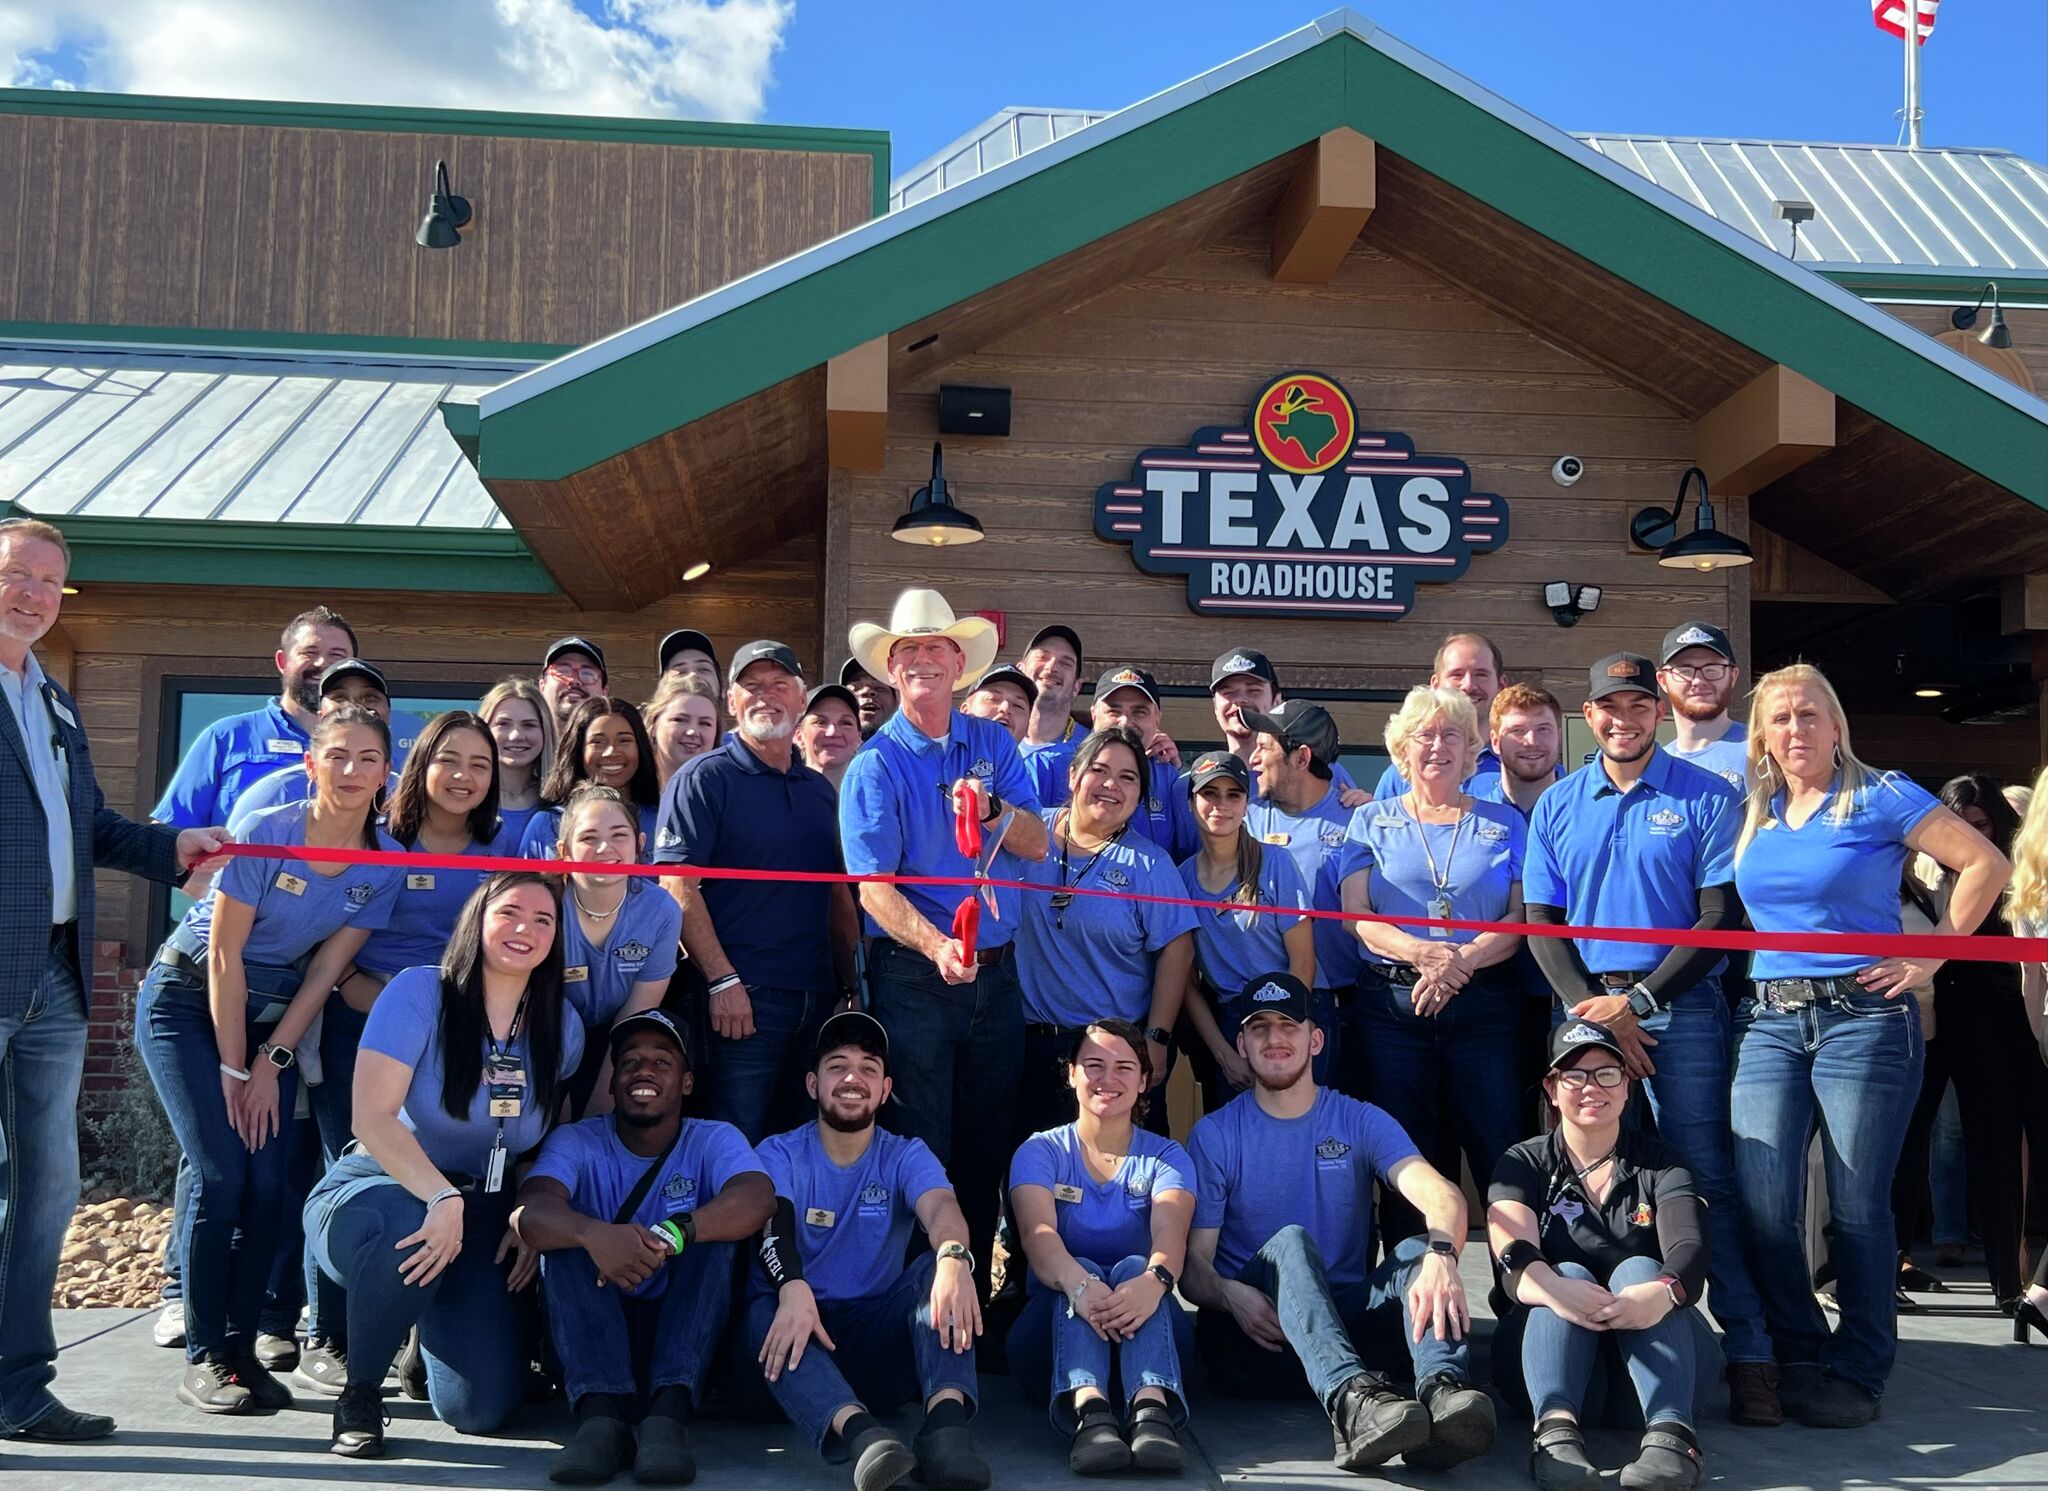  Beaumont Texas Roadhouse officially opens its doors 